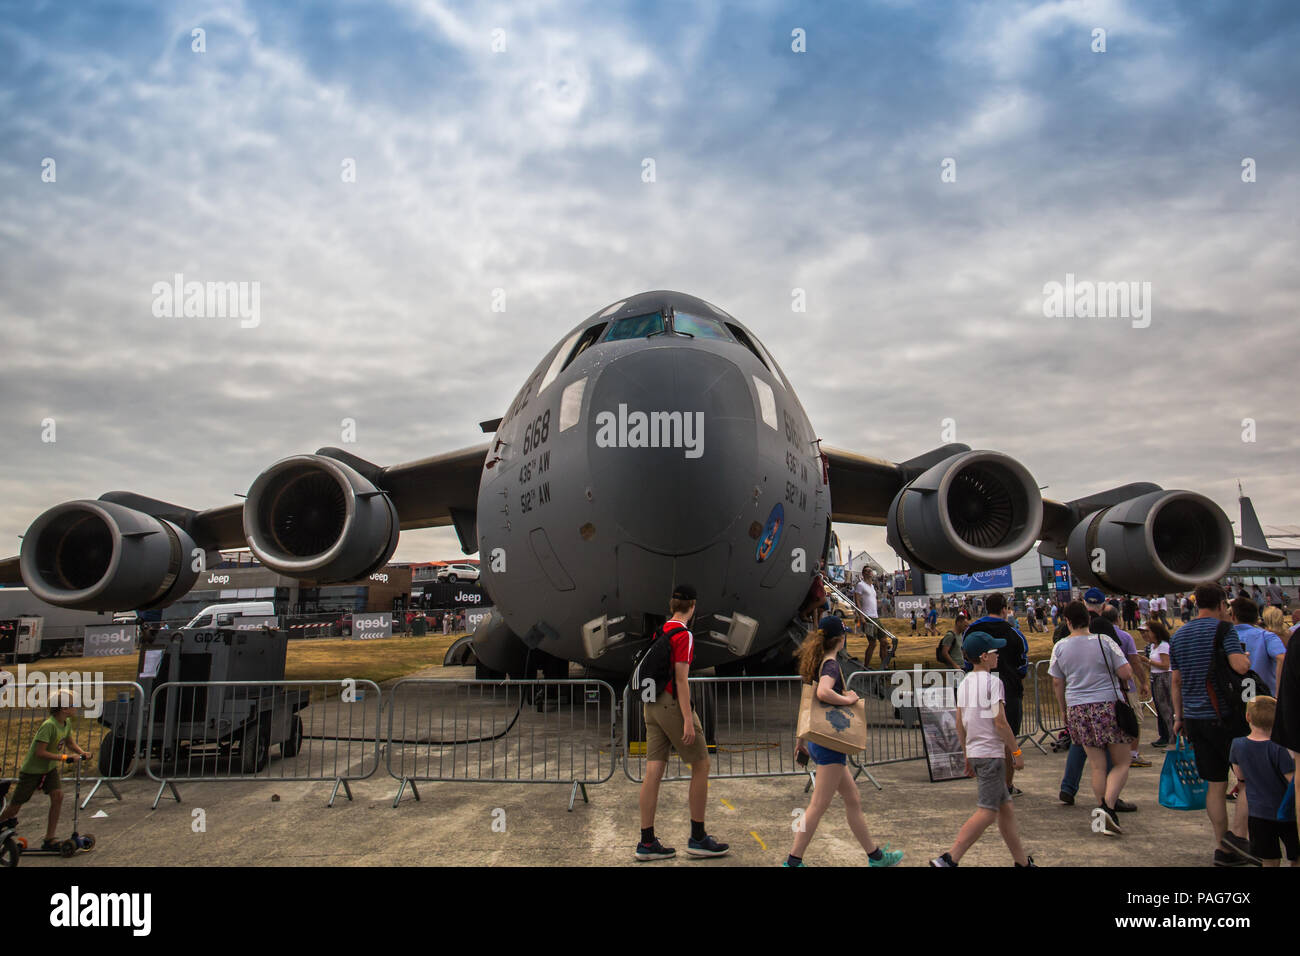 The Boeing C-17 Globemaster III large military transport aircraft display in the Farnborough Airshow 2018. Stock Photo